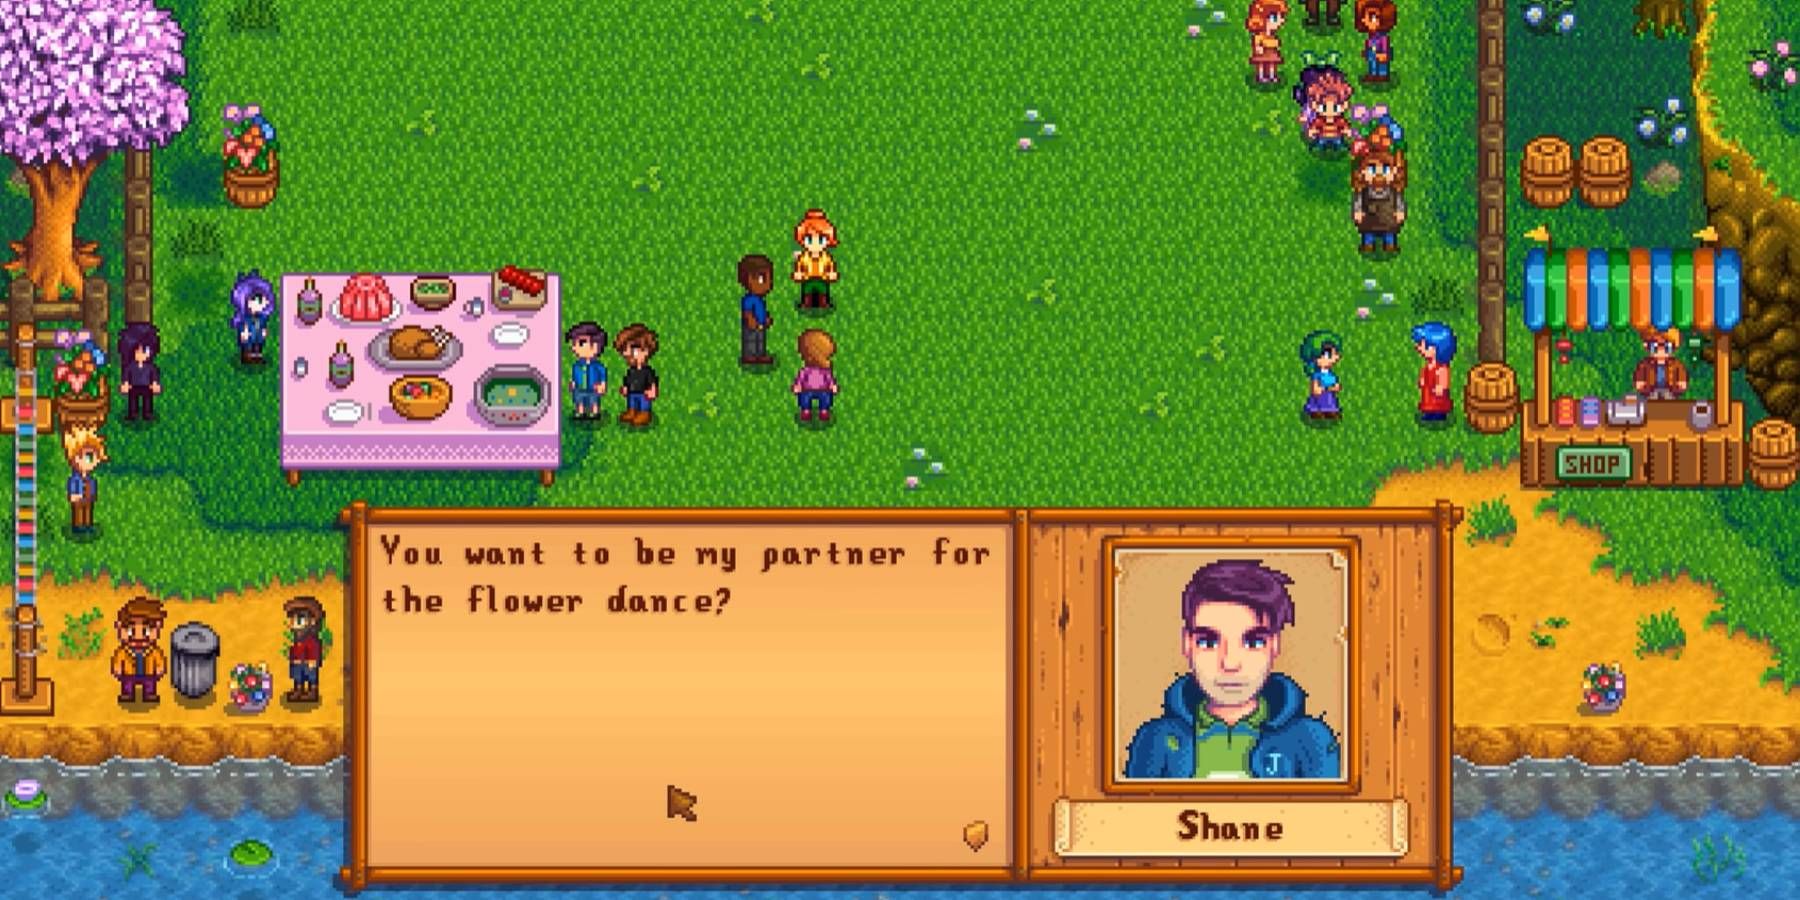 Asking Shane to the Flower Dance in Stardew Valley